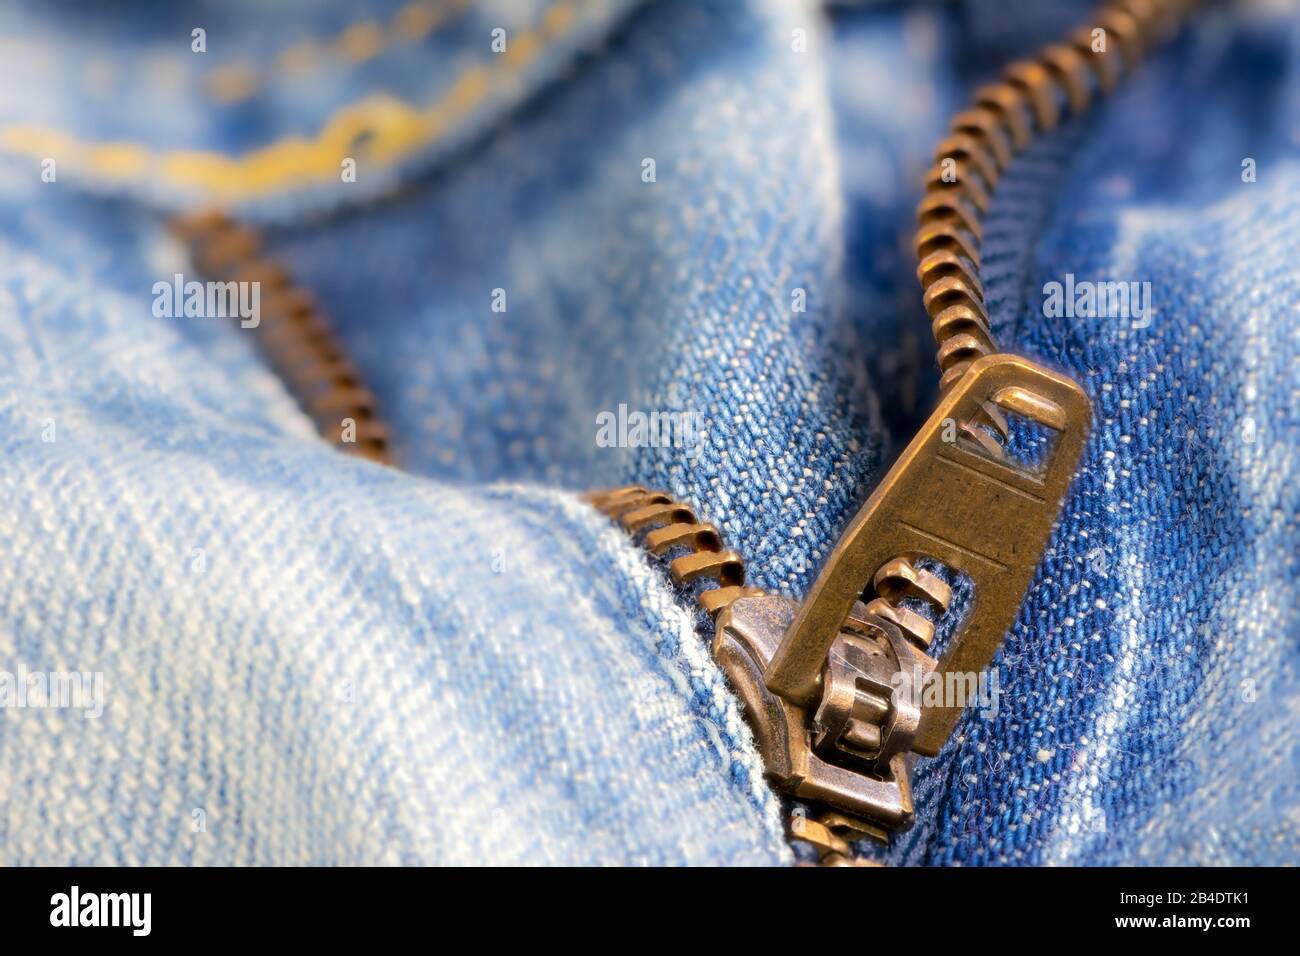 Open zipper of a worn out blue jeans Stock Photo